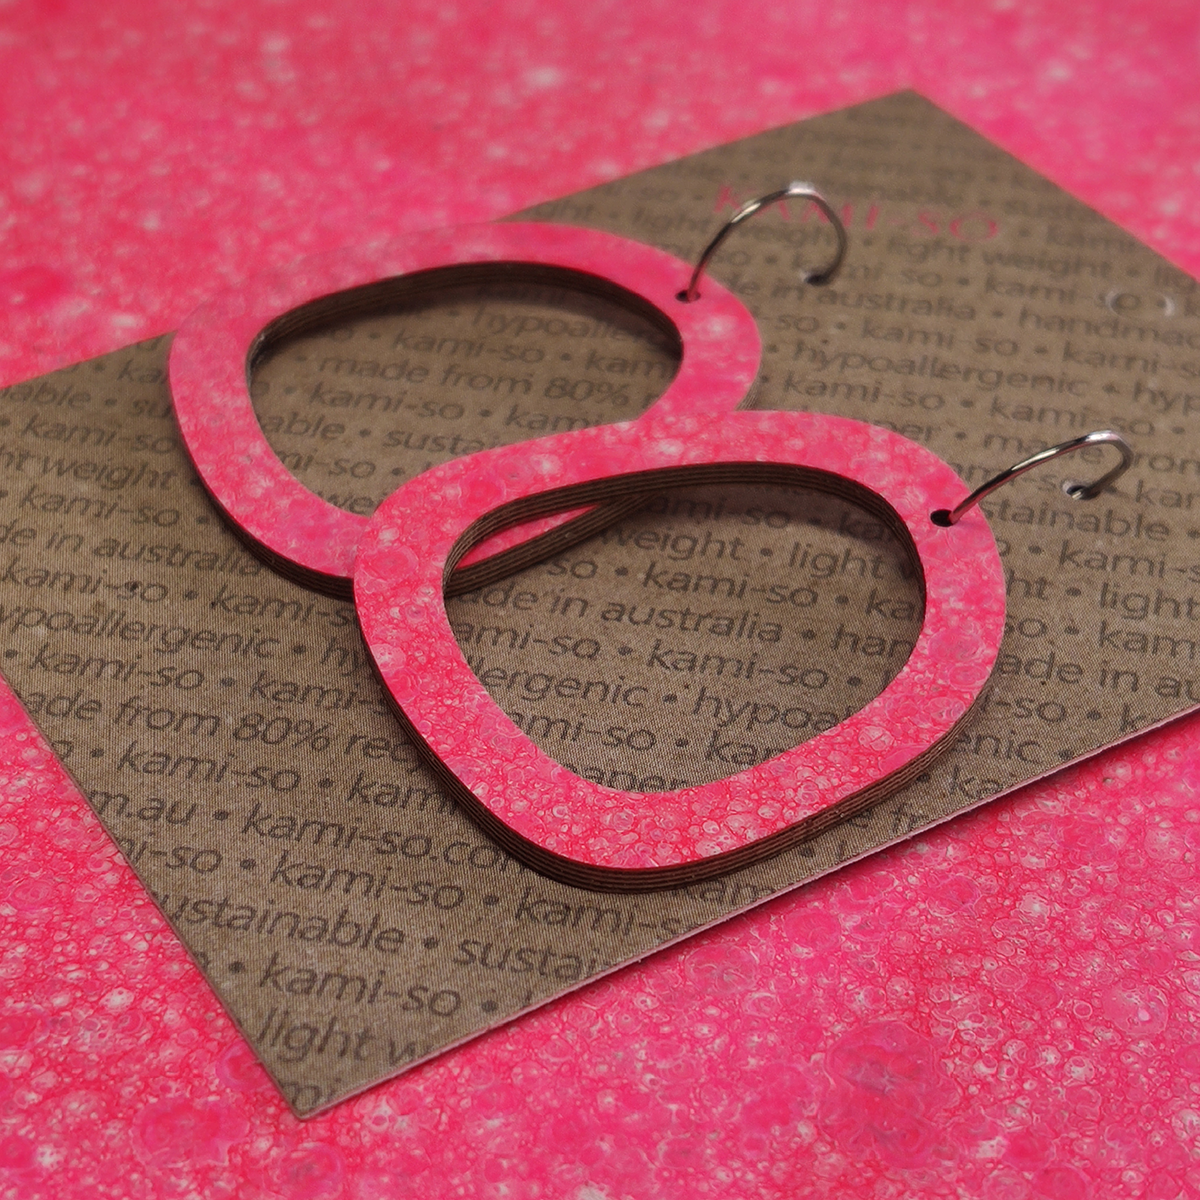 KAMI-SO- Square Recycled Paper Earrings - Pink Speckle: Small Hoop